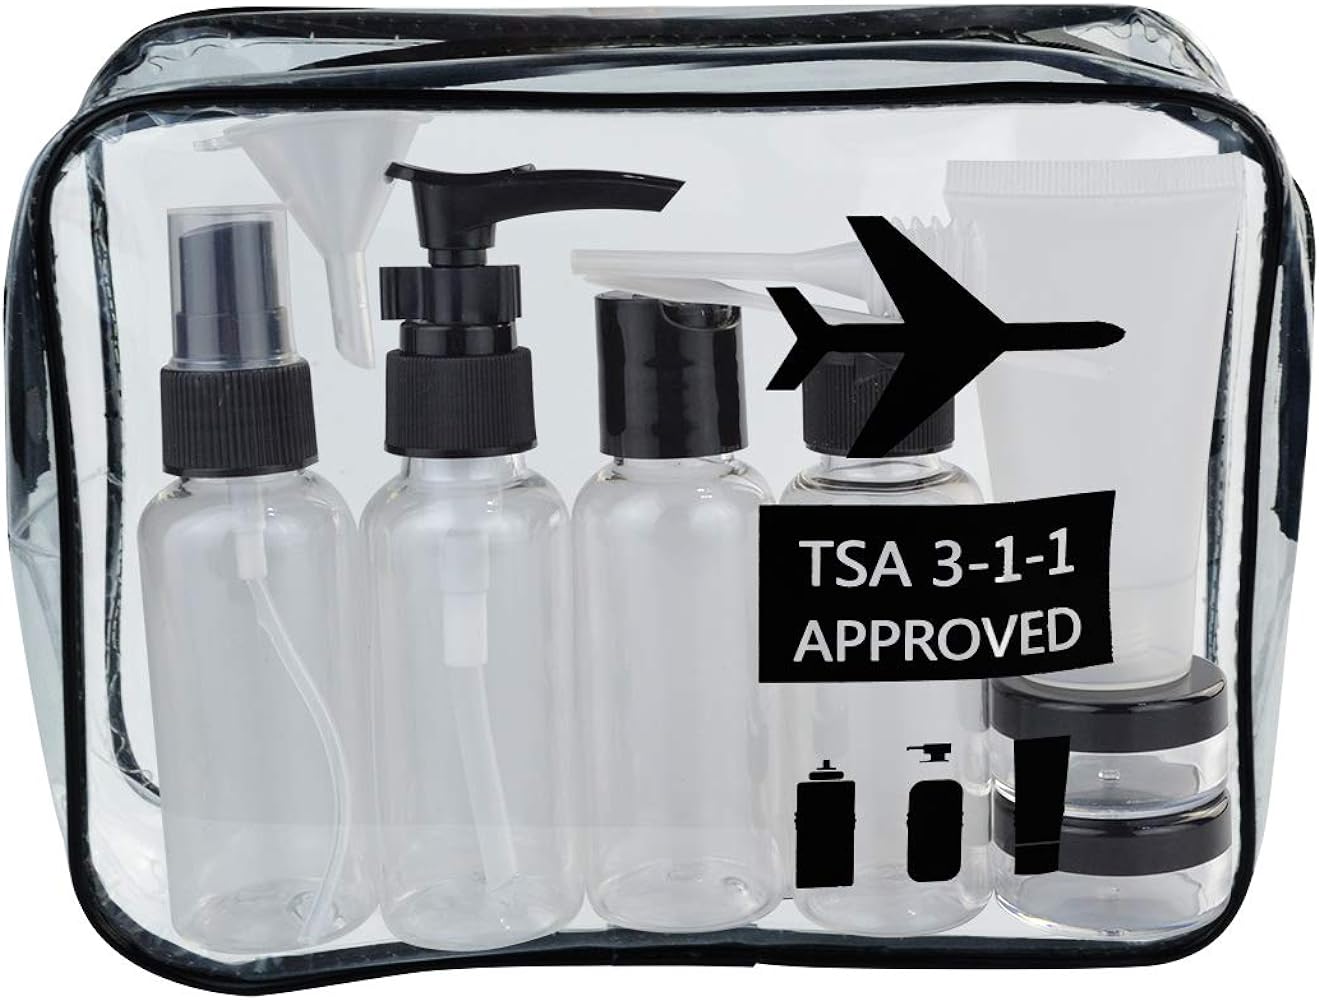 What Items are Allowed in My TSA Approved Quart Size Bag? 2023 Update